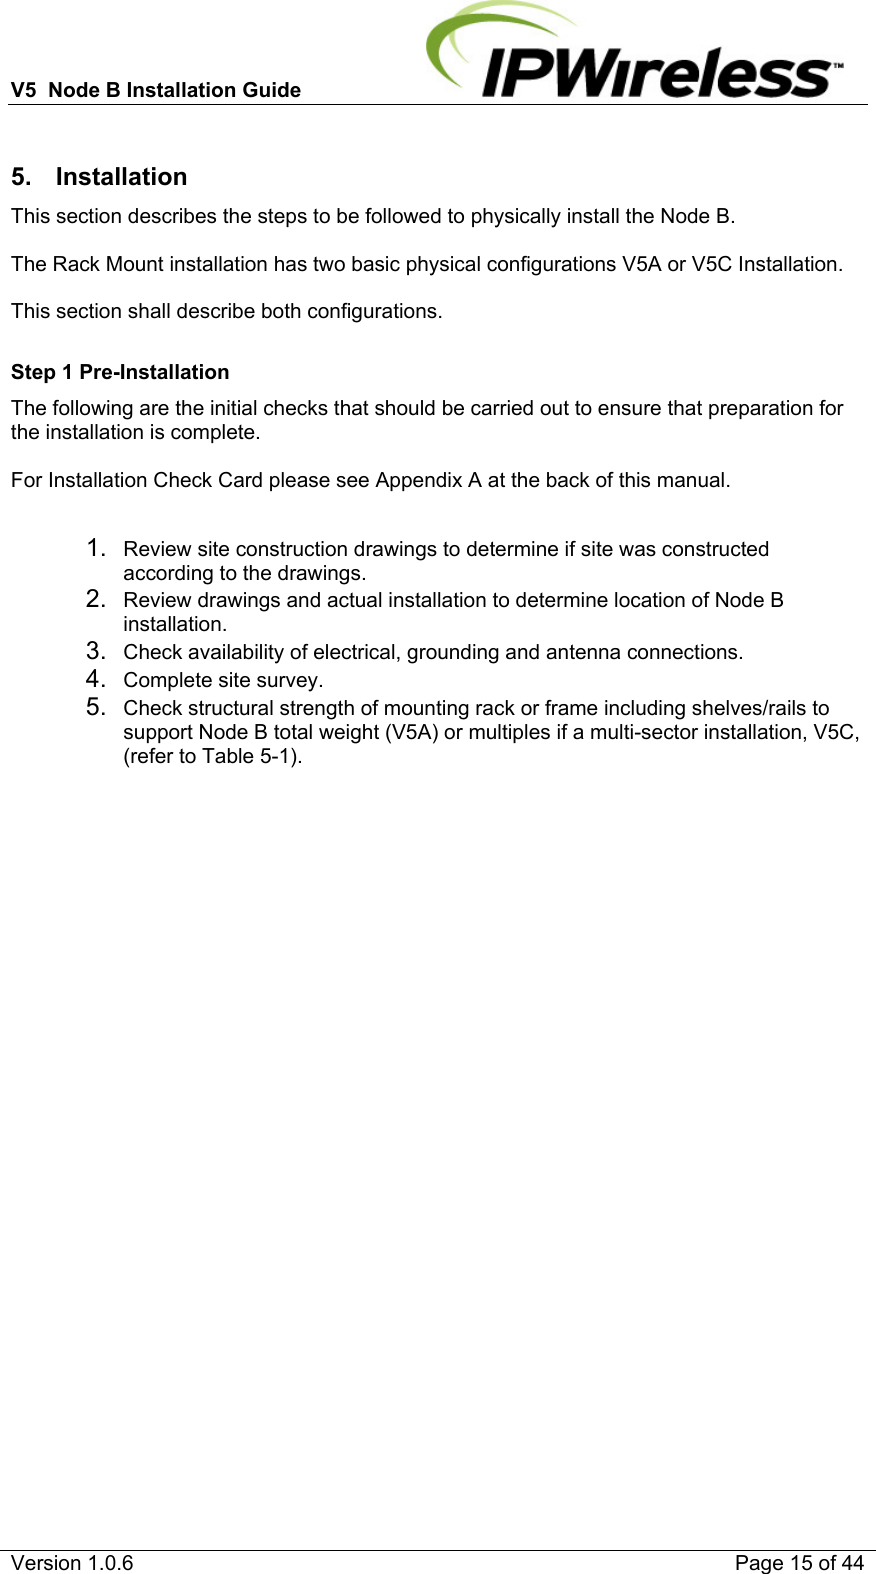 V5  Node B Installation Guide                           Version 1.0.6    Page 15 of 44  5. Installation This section describes the steps to be followed to physically install the Node B.  The Rack Mount installation has two basic physical configurations V5A or V5C Installation.  This section shall describe both configurations.  Step 1 Pre-Installation The following are the initial checks that should be carried out to ensure that preparation for the installation is complete.  For Installation Check Card please see Appendix A at the back of this manual.  1.  Review site construction drawings to determine if site was constructed according to the drawings. 2.  Review drawings and actual installation to determine location of Node B installation. 3.  Check availability of electrical, grounding and antenna connections. 4.  Complete site survey. 5.  Check structural strength of mounting rack or frame including shelves/rails to support Node B total weight (V5A) or multiples if a multi-sector installation, V5C, (refer to Table 5-1).     